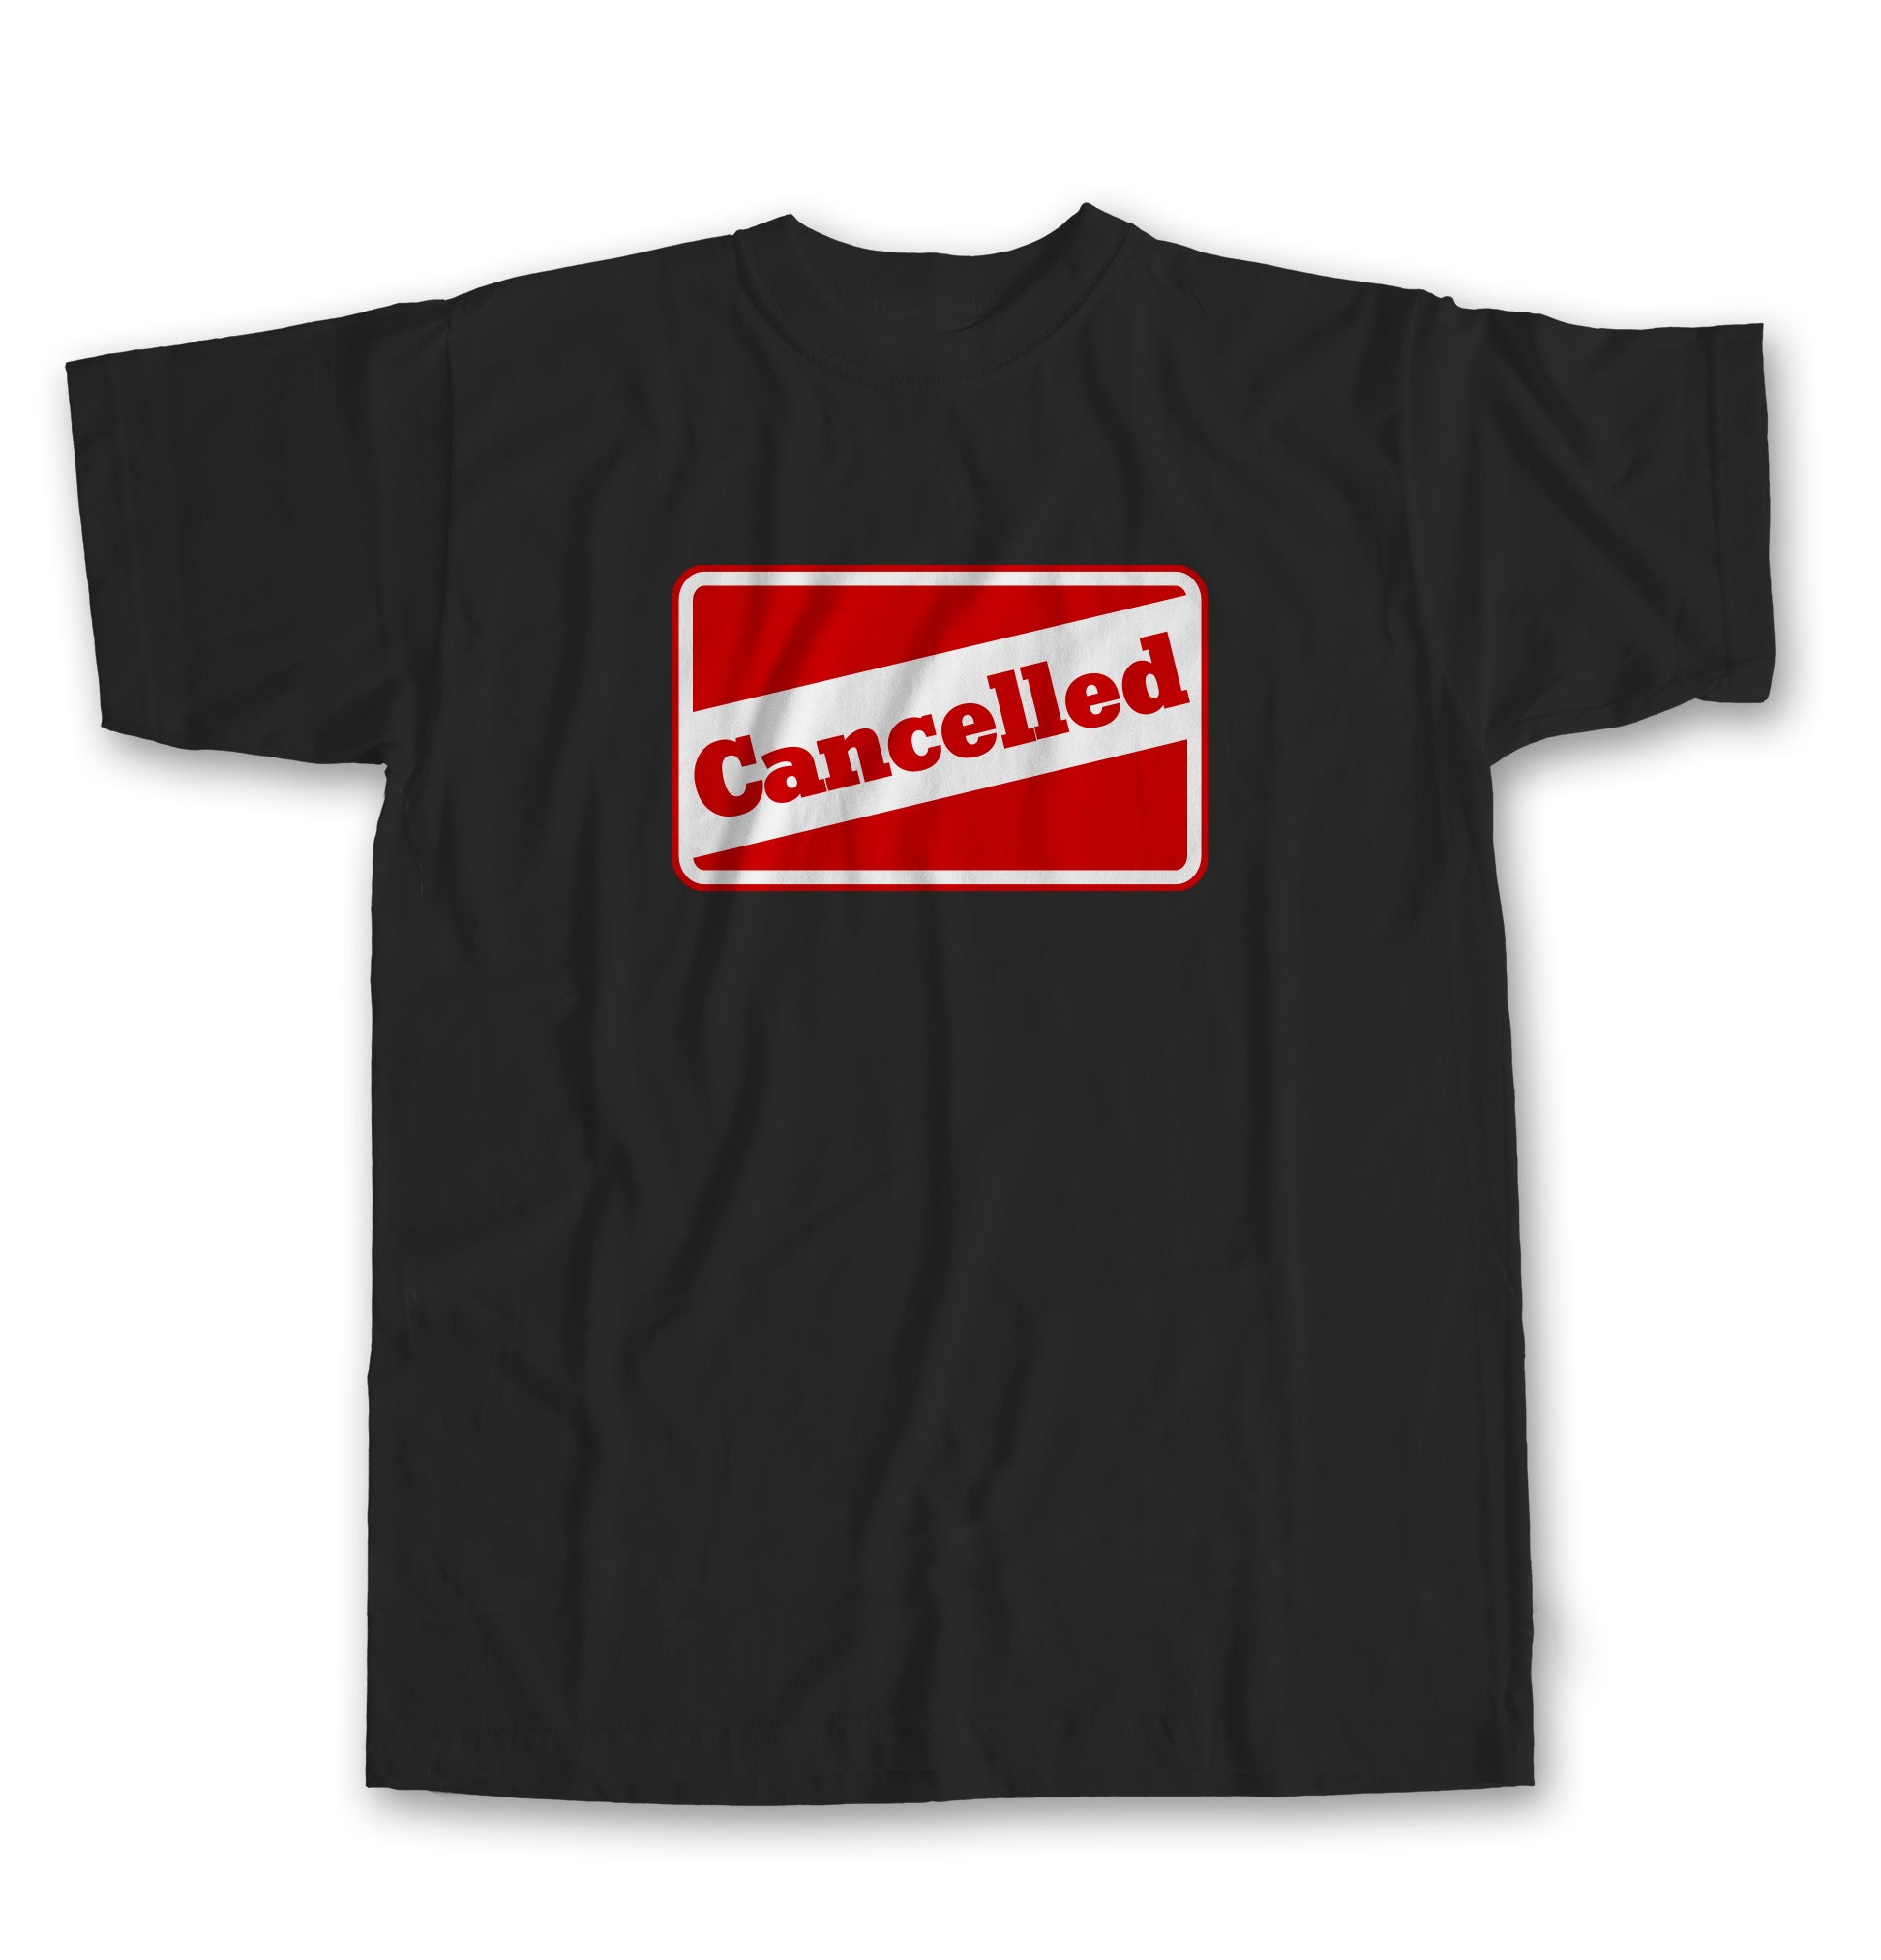 Shorty's Cancelled Short Sleeve T-shirt